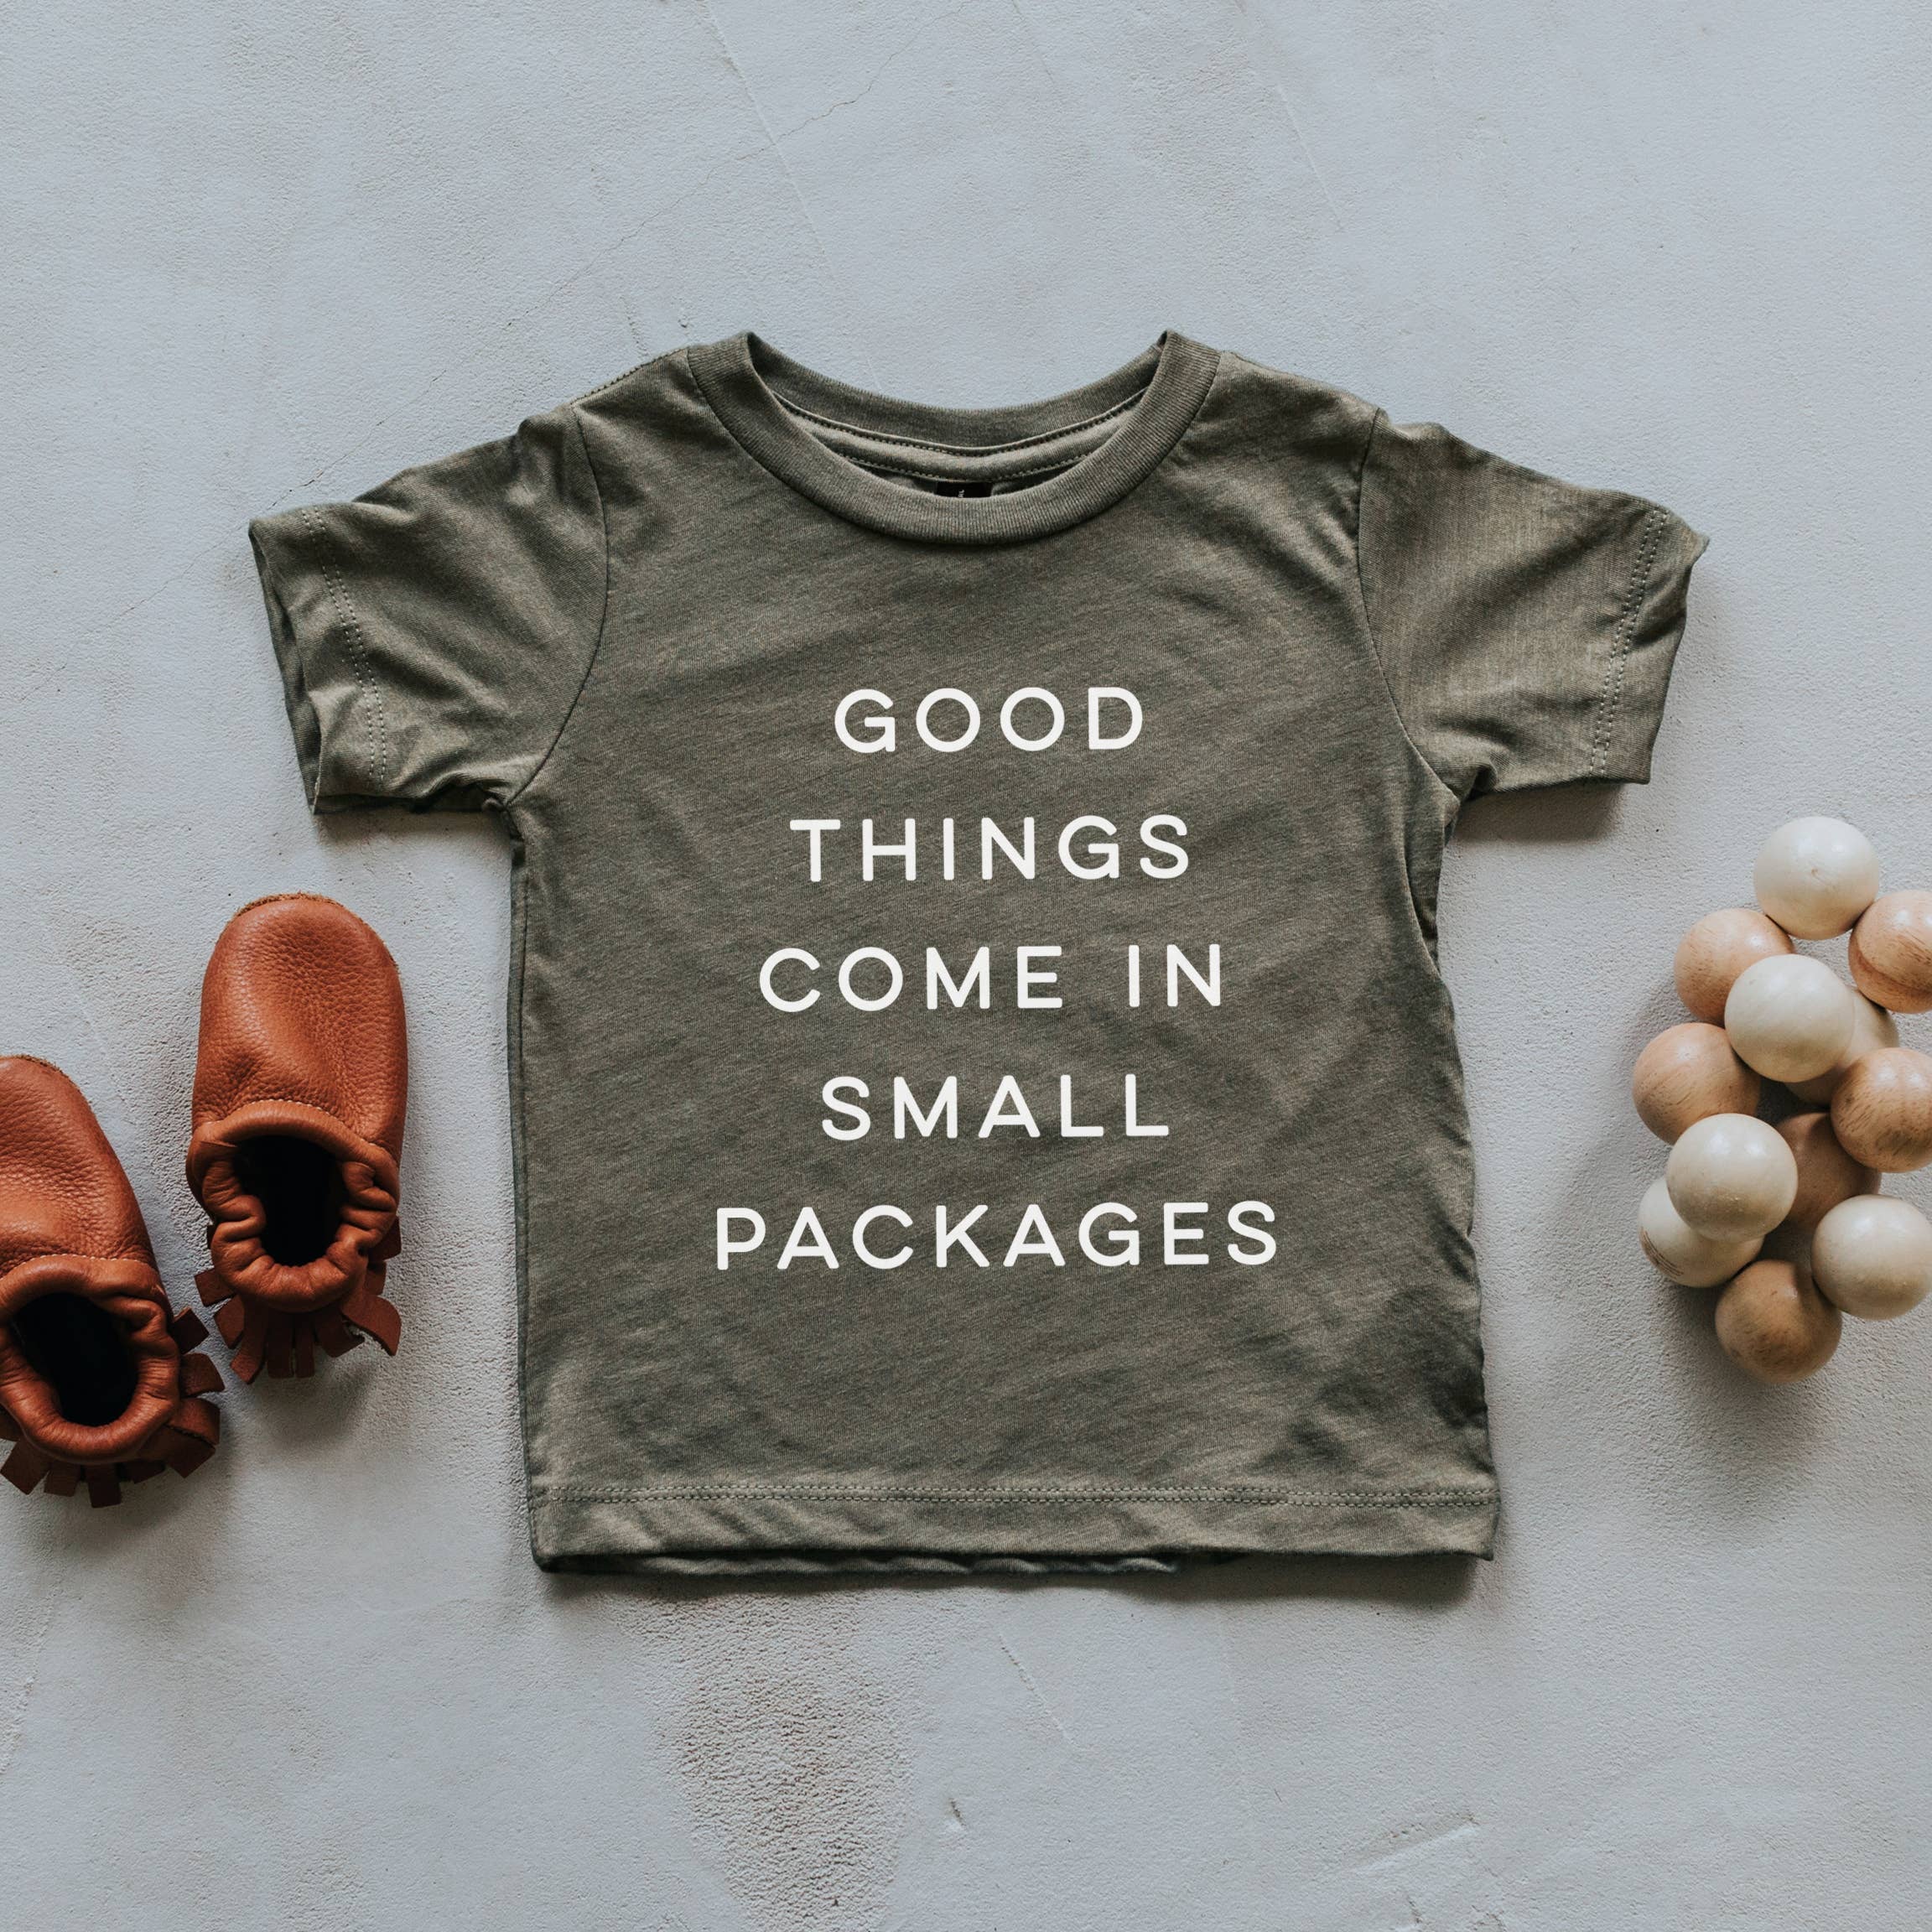 The Good Things Come in Small Packages Kids Tee